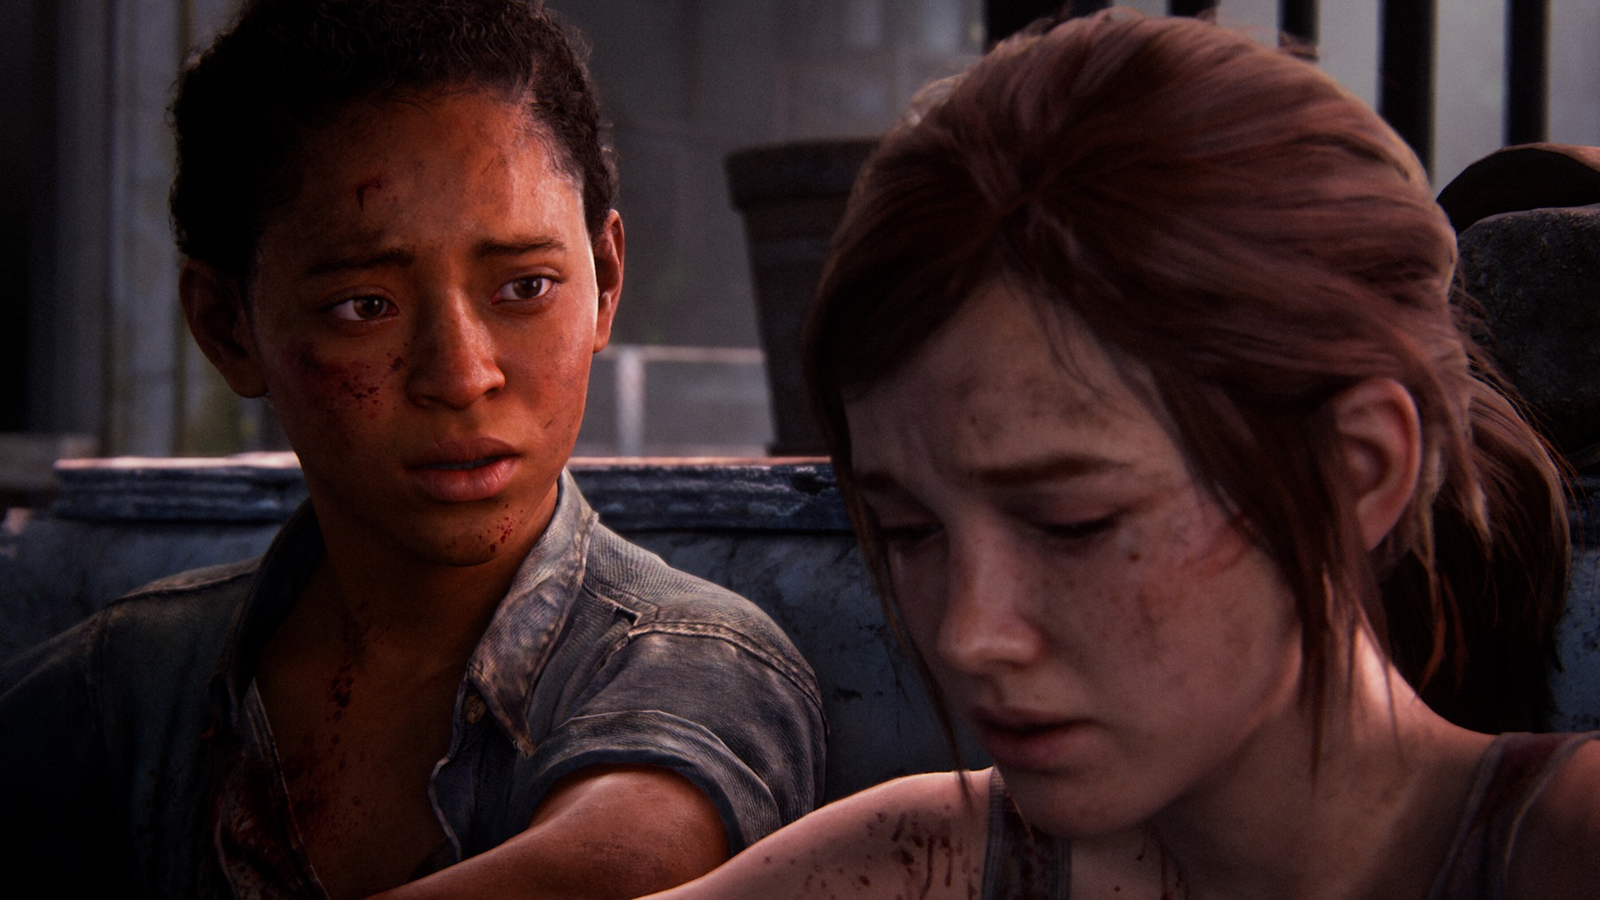 Naughty Dog on X: You can get The Last of Us Part I on PC for 20% off on  Steam right now! Relive this classic, or play through its iconic story for